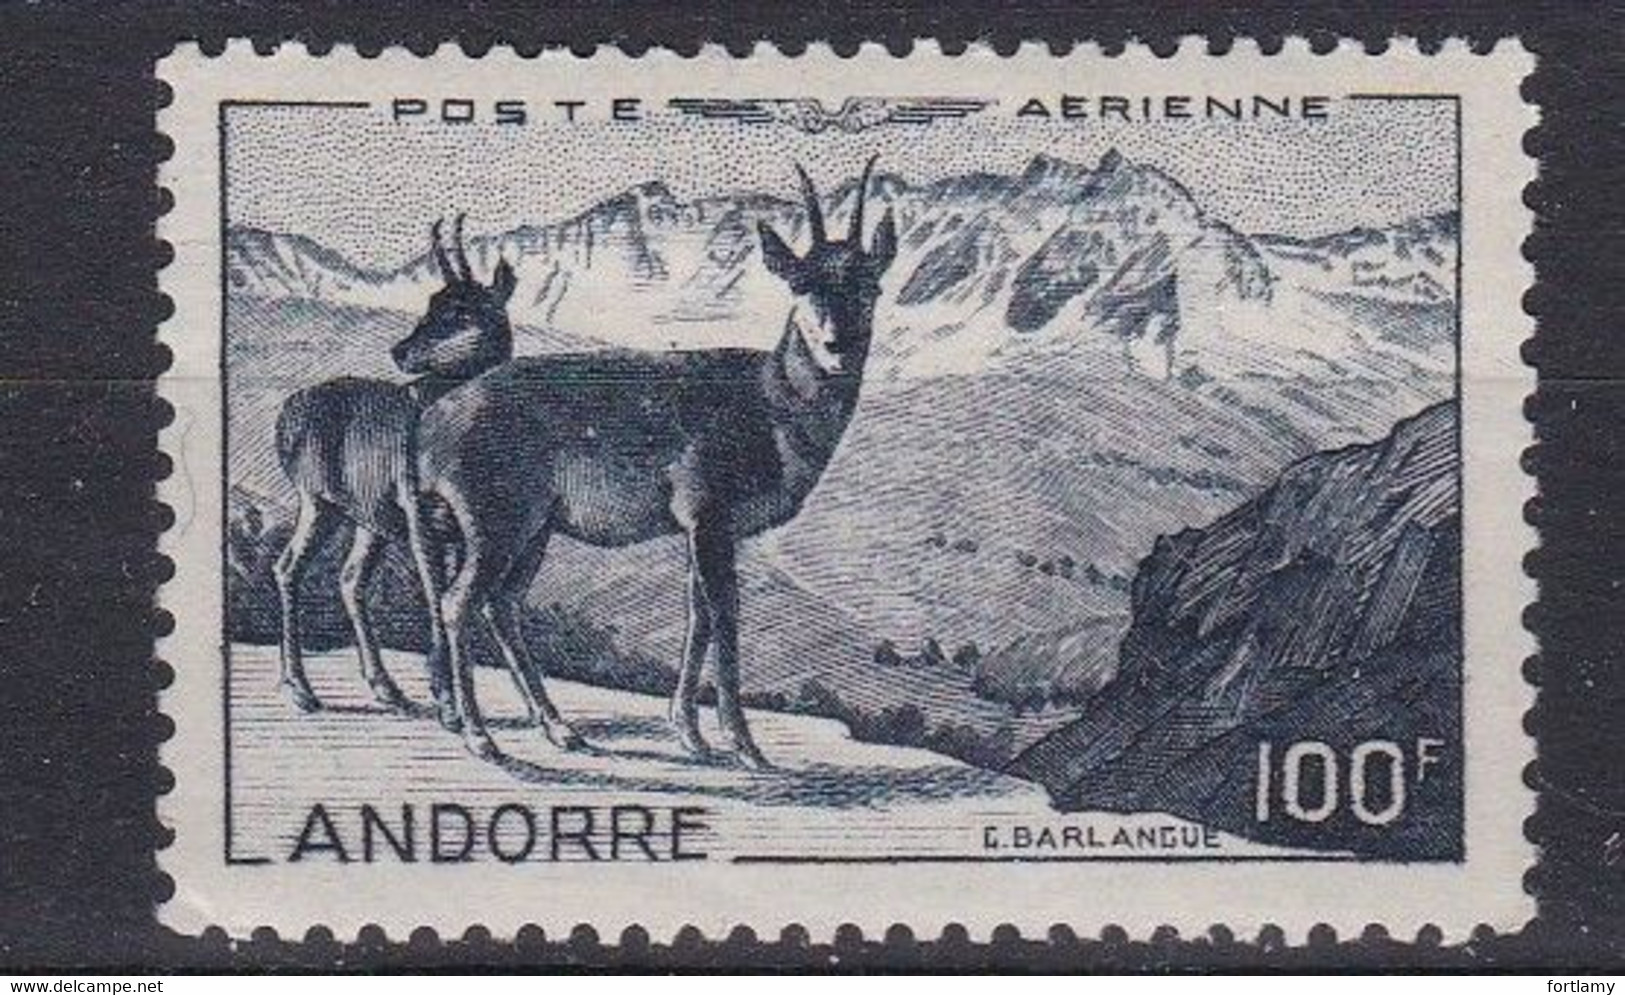 ANDORRE FRANCAIS LOT 444  PA N° 1 * - Luchtpost